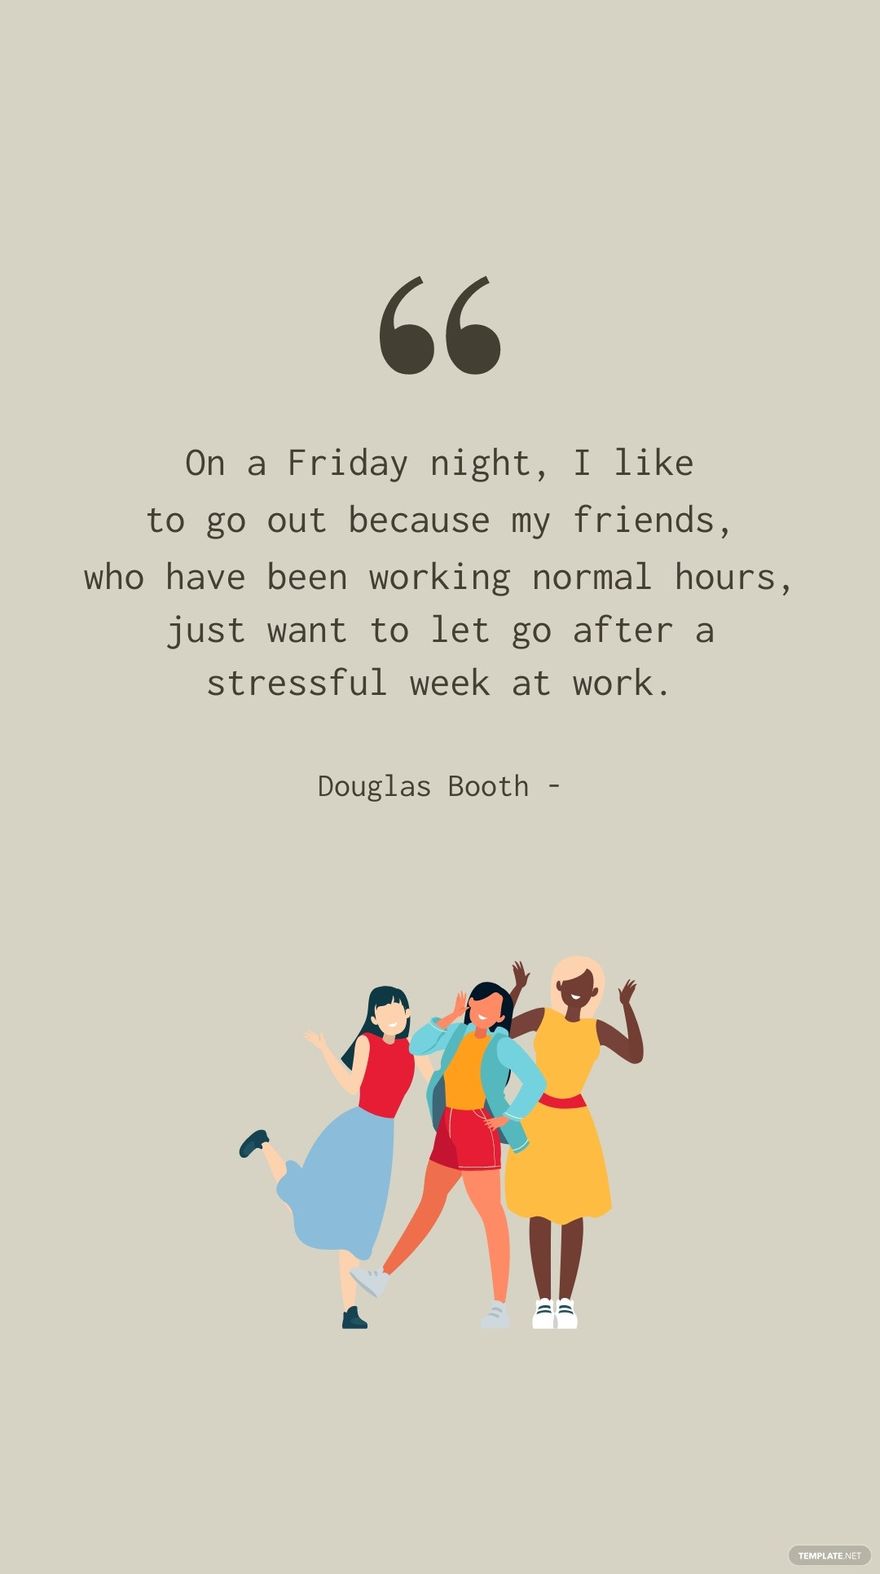 Douglas Booth - On a Friday night, I like to go out because of my friends, who have been working normal hours, just want to let go after a stressful week at work.